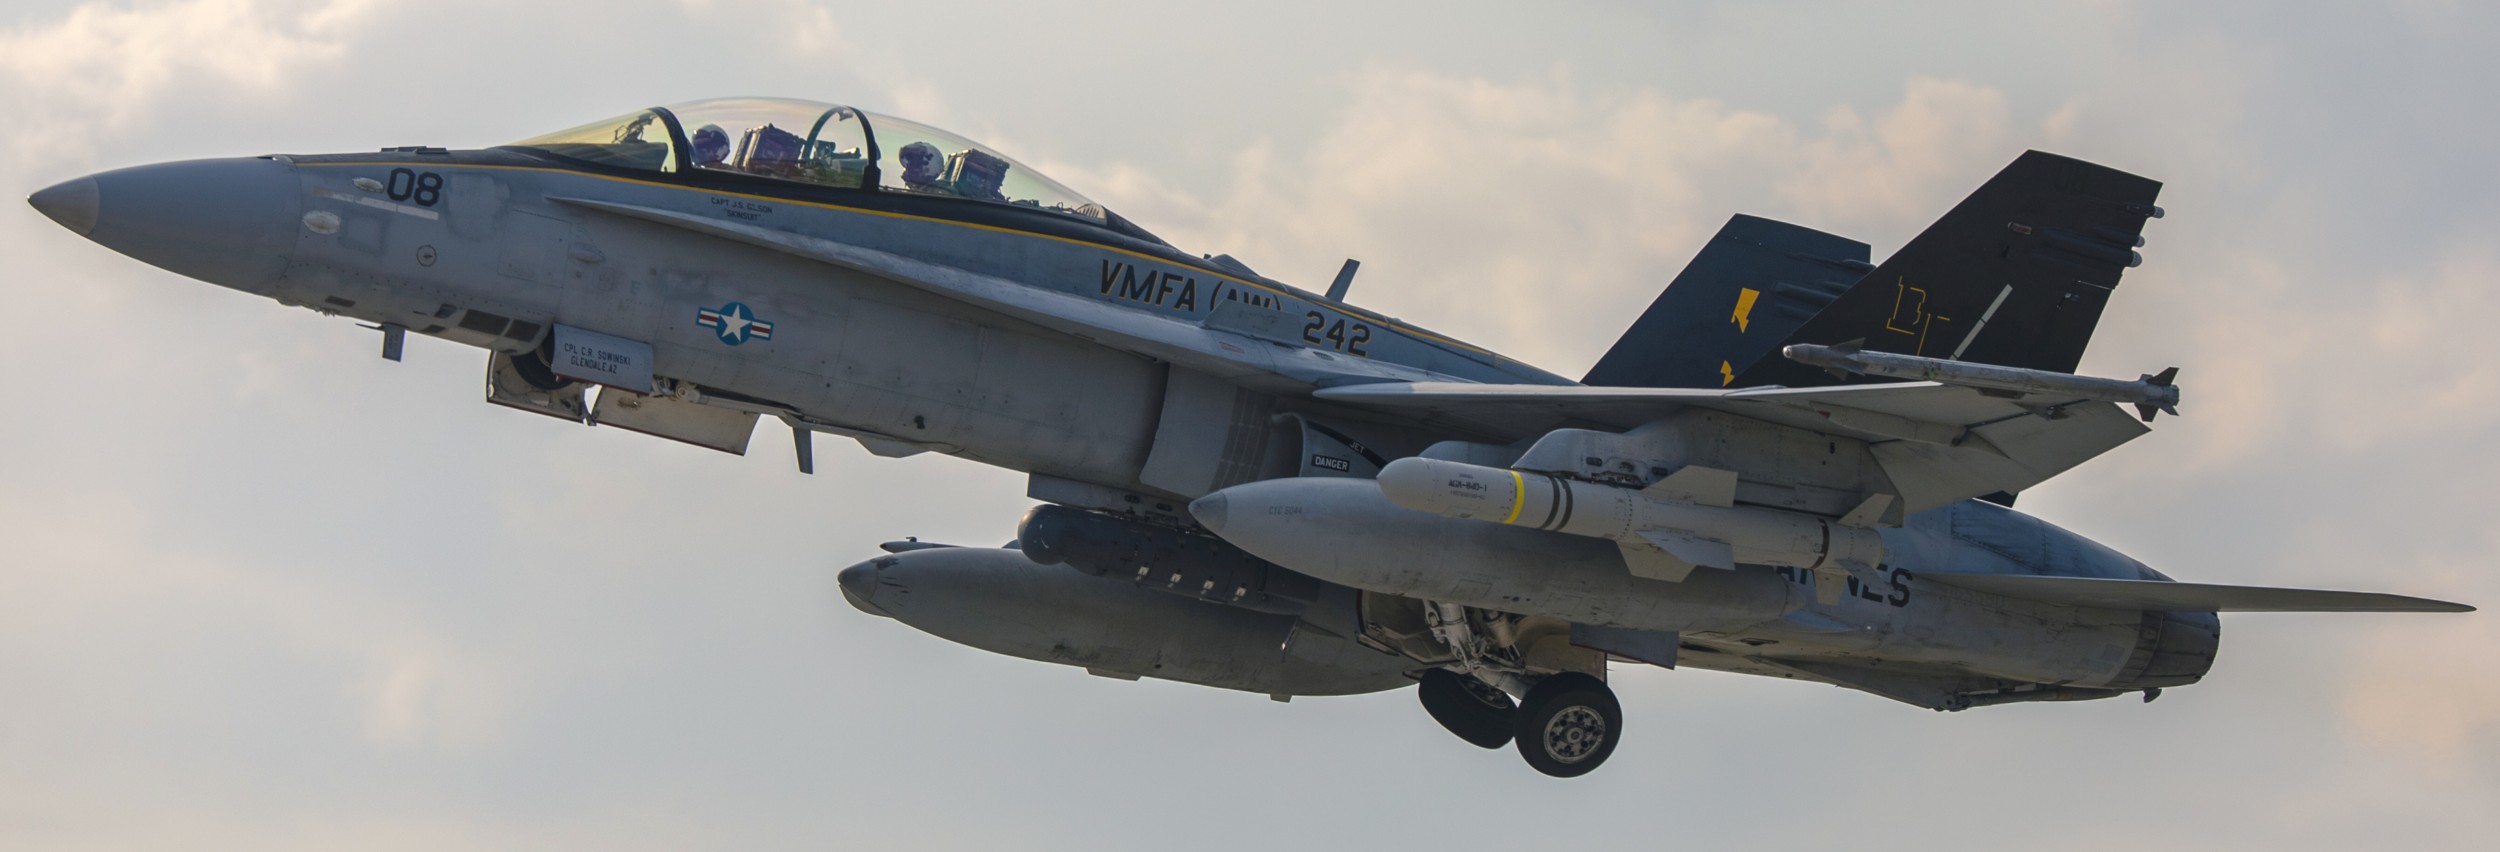 vmfa(aw)-242 bats marine all-weather fighter attack squadron usmc f/a-18d hornet 113 agm-84d harpoon missile